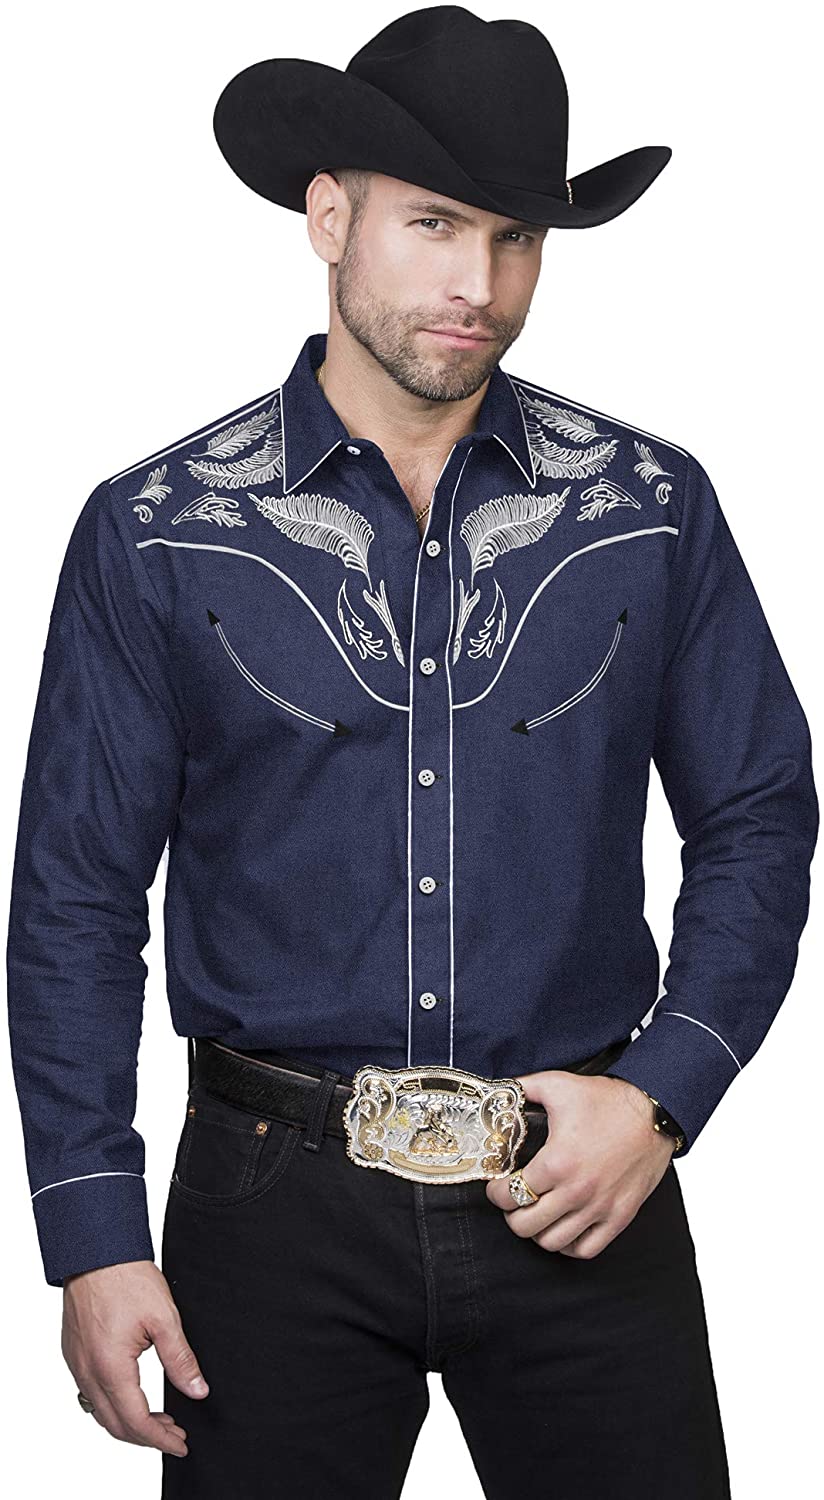 COOFANDY Mens Cowboy Shirts Long Sleeve Casual Regular Fit Denim Shirt Floral Embroidery Button Down Western Shirts 